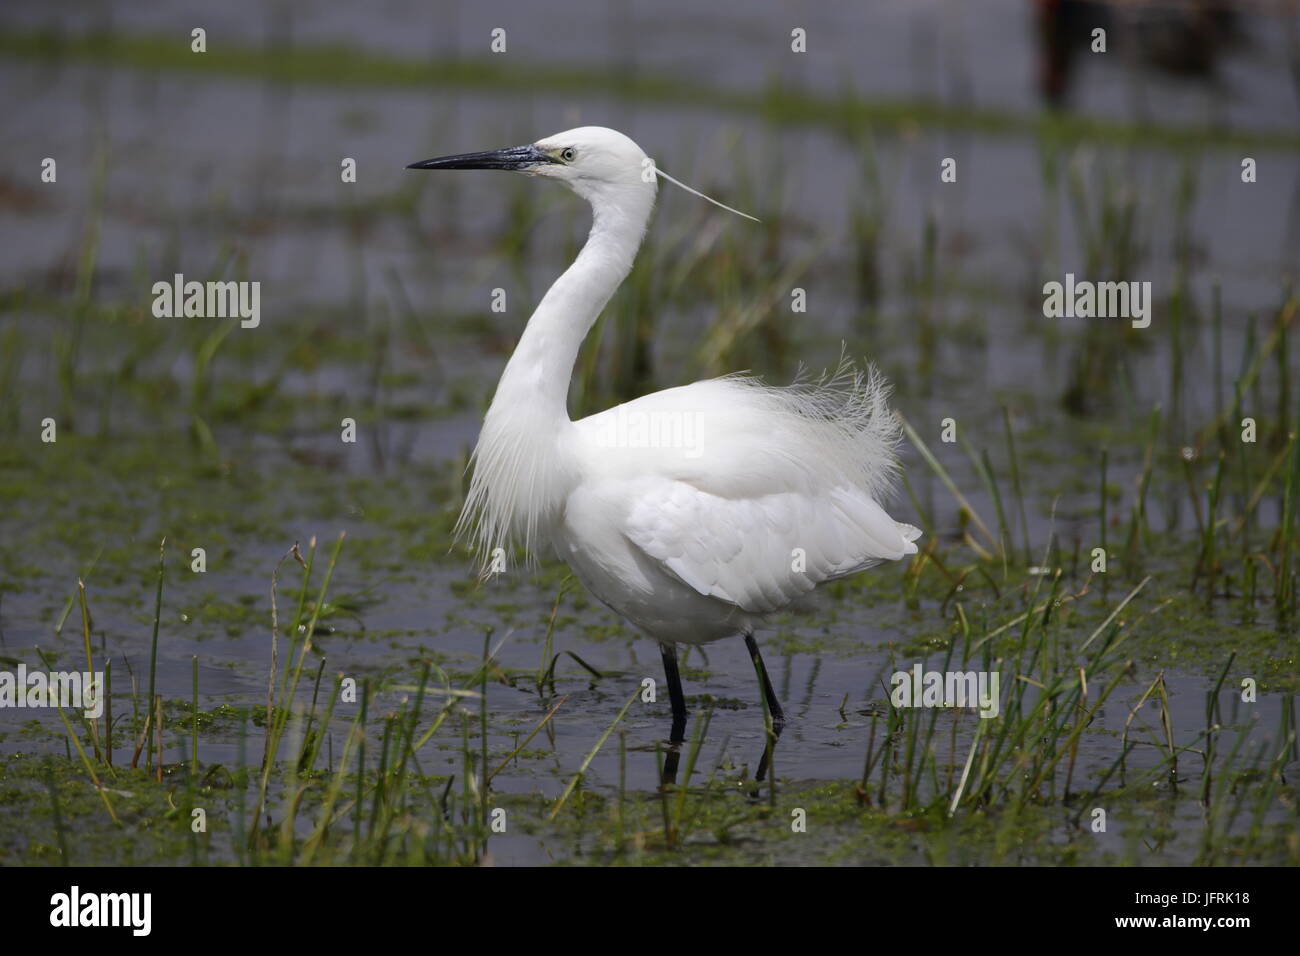 Adult Little Egret feeding in shallows Stock Photo